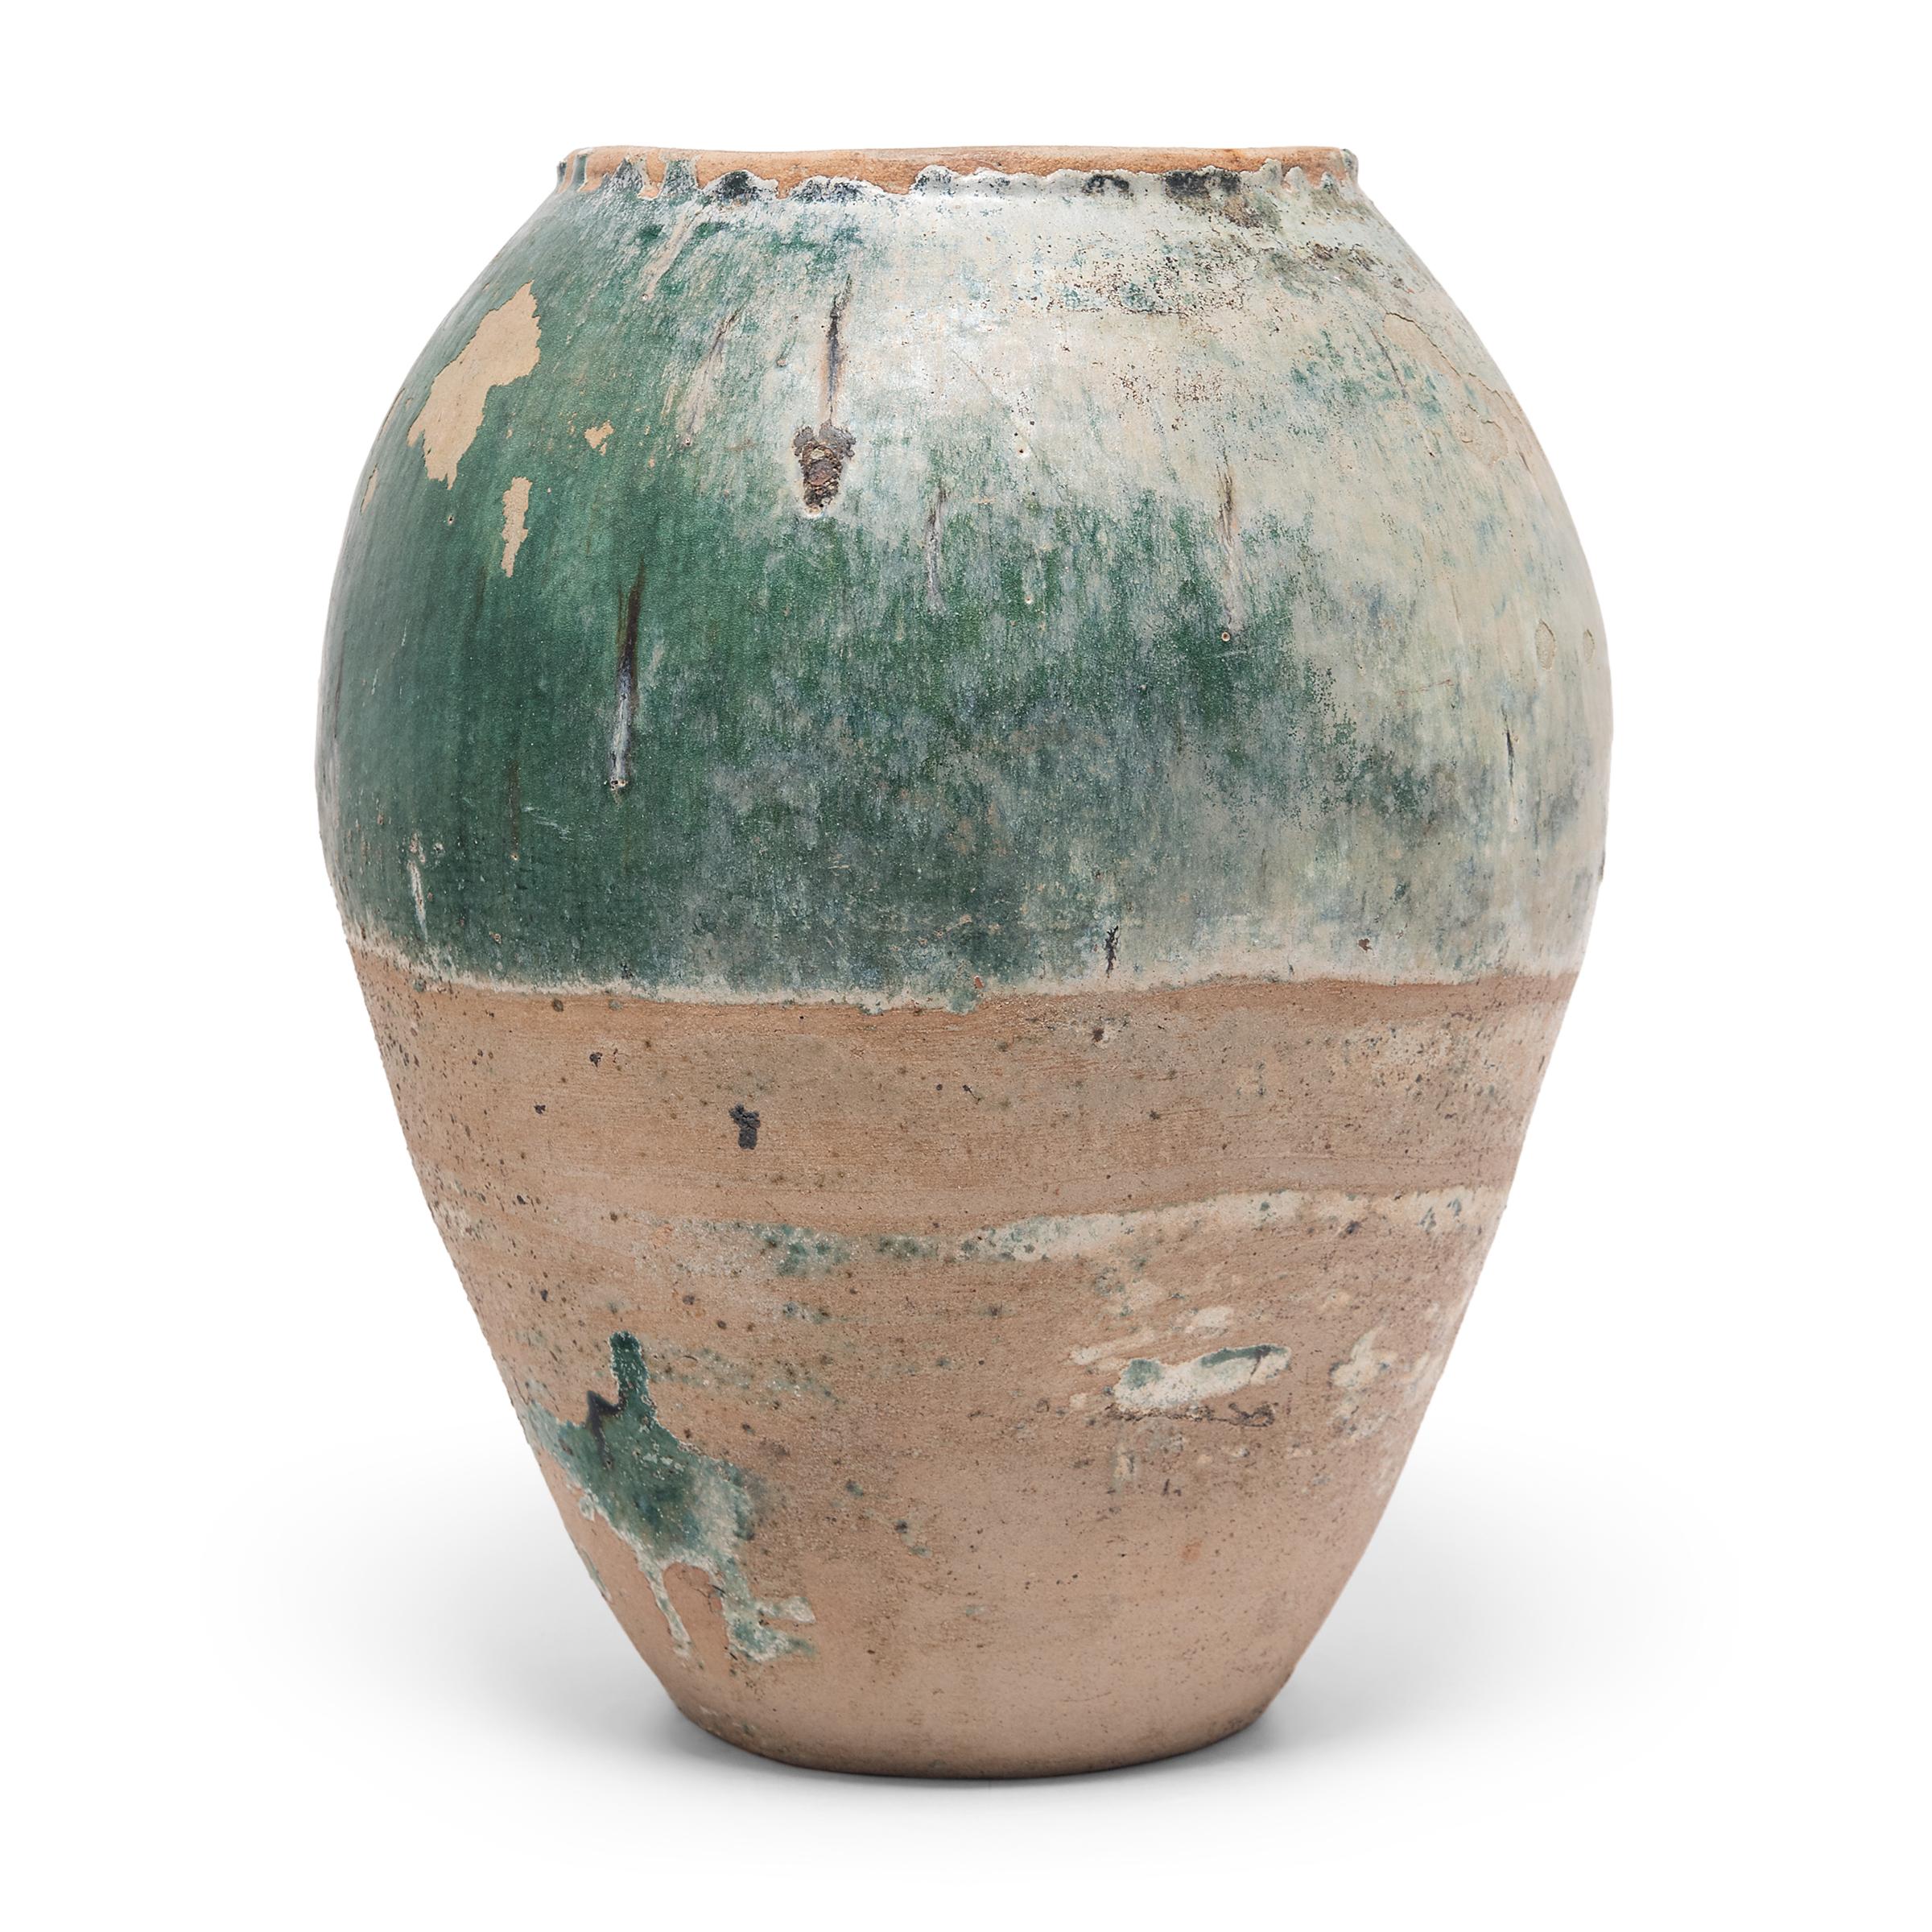 Charged with the humble task of storing dry goods, these large earthenware jars are distinguished by their tapered forms and beautifully imperfect glazed exteriors. The upper half of each vessel is coated in crackled overglaze that transitions from